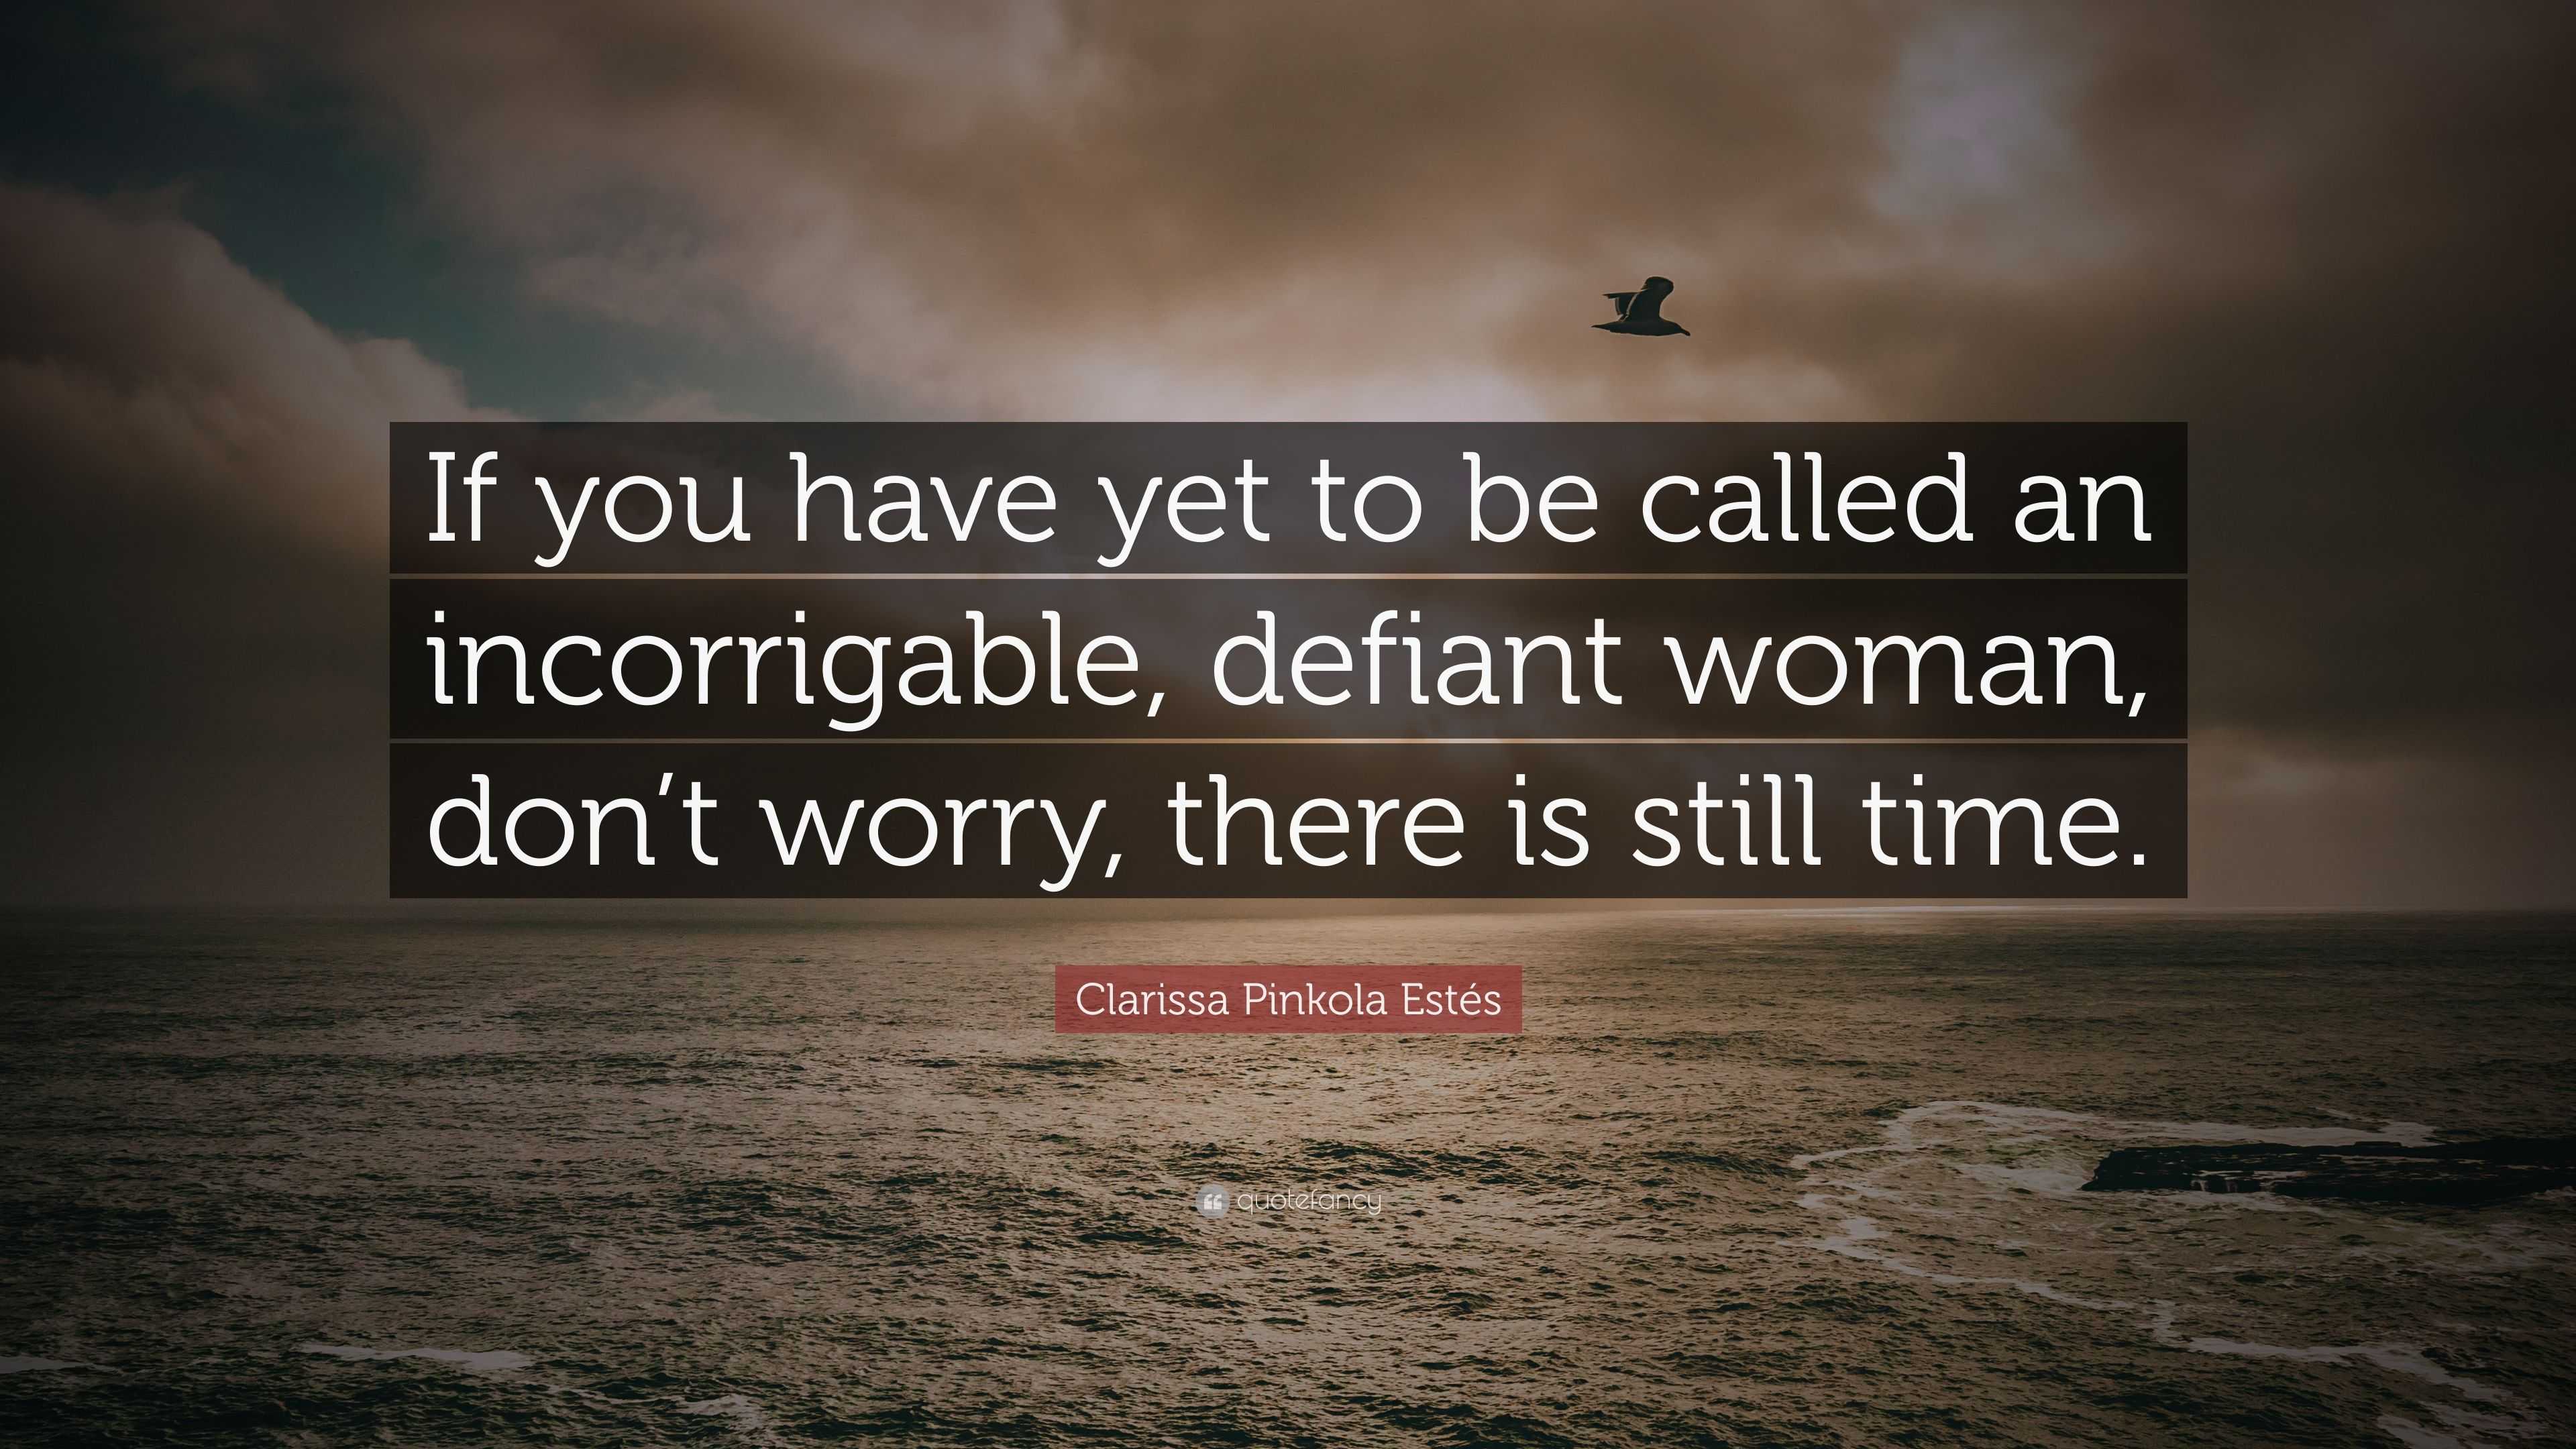 pinkola clarissa quote woman estés defiant called yet quotes quotefancy don worry still strong